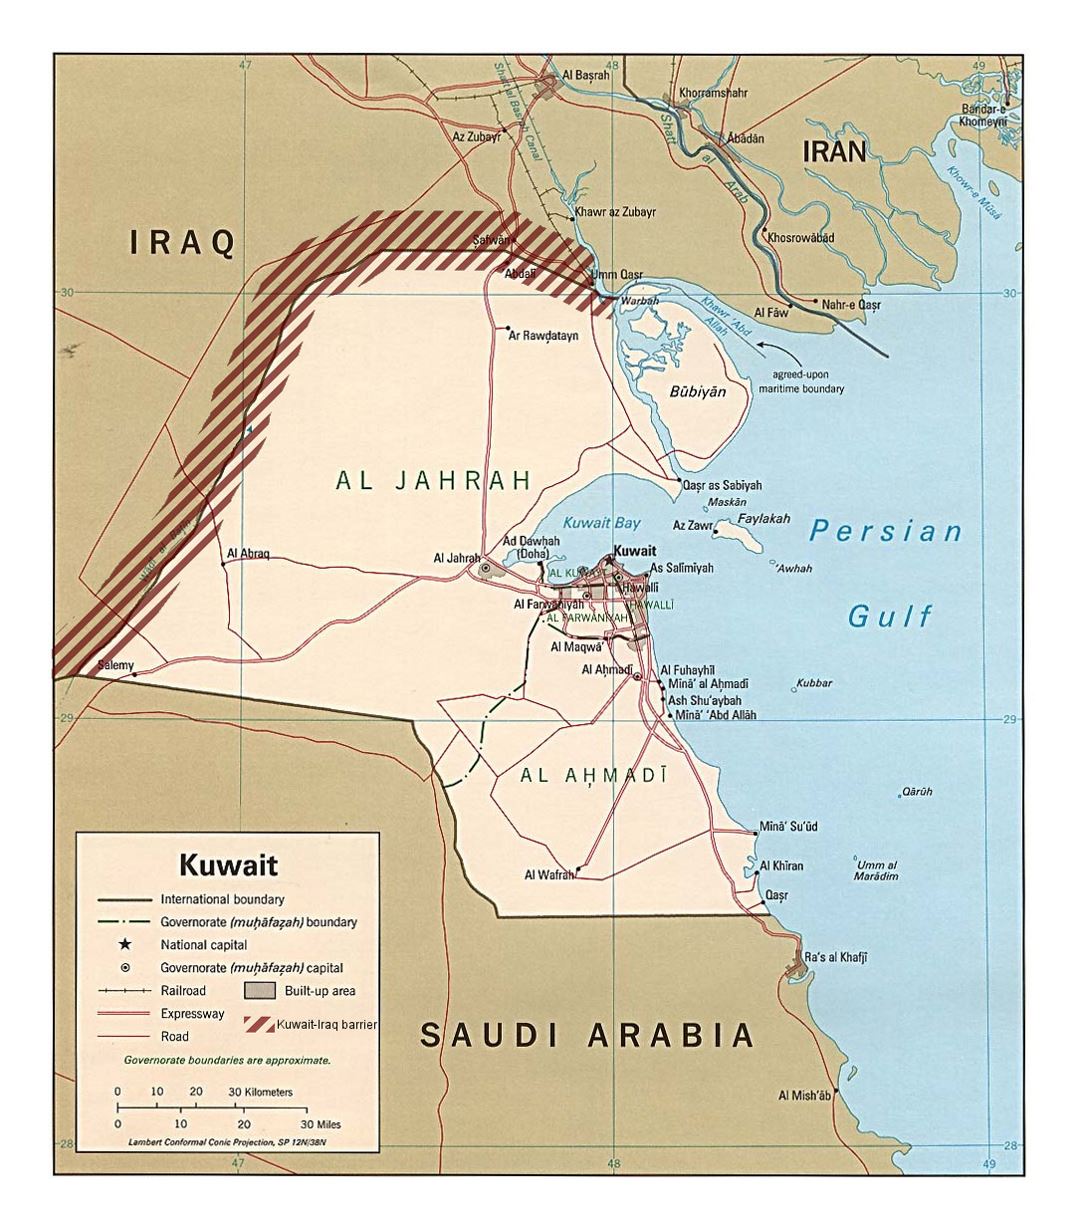 Detailed political map of Kuwait with Kuwait-Iraq barrier